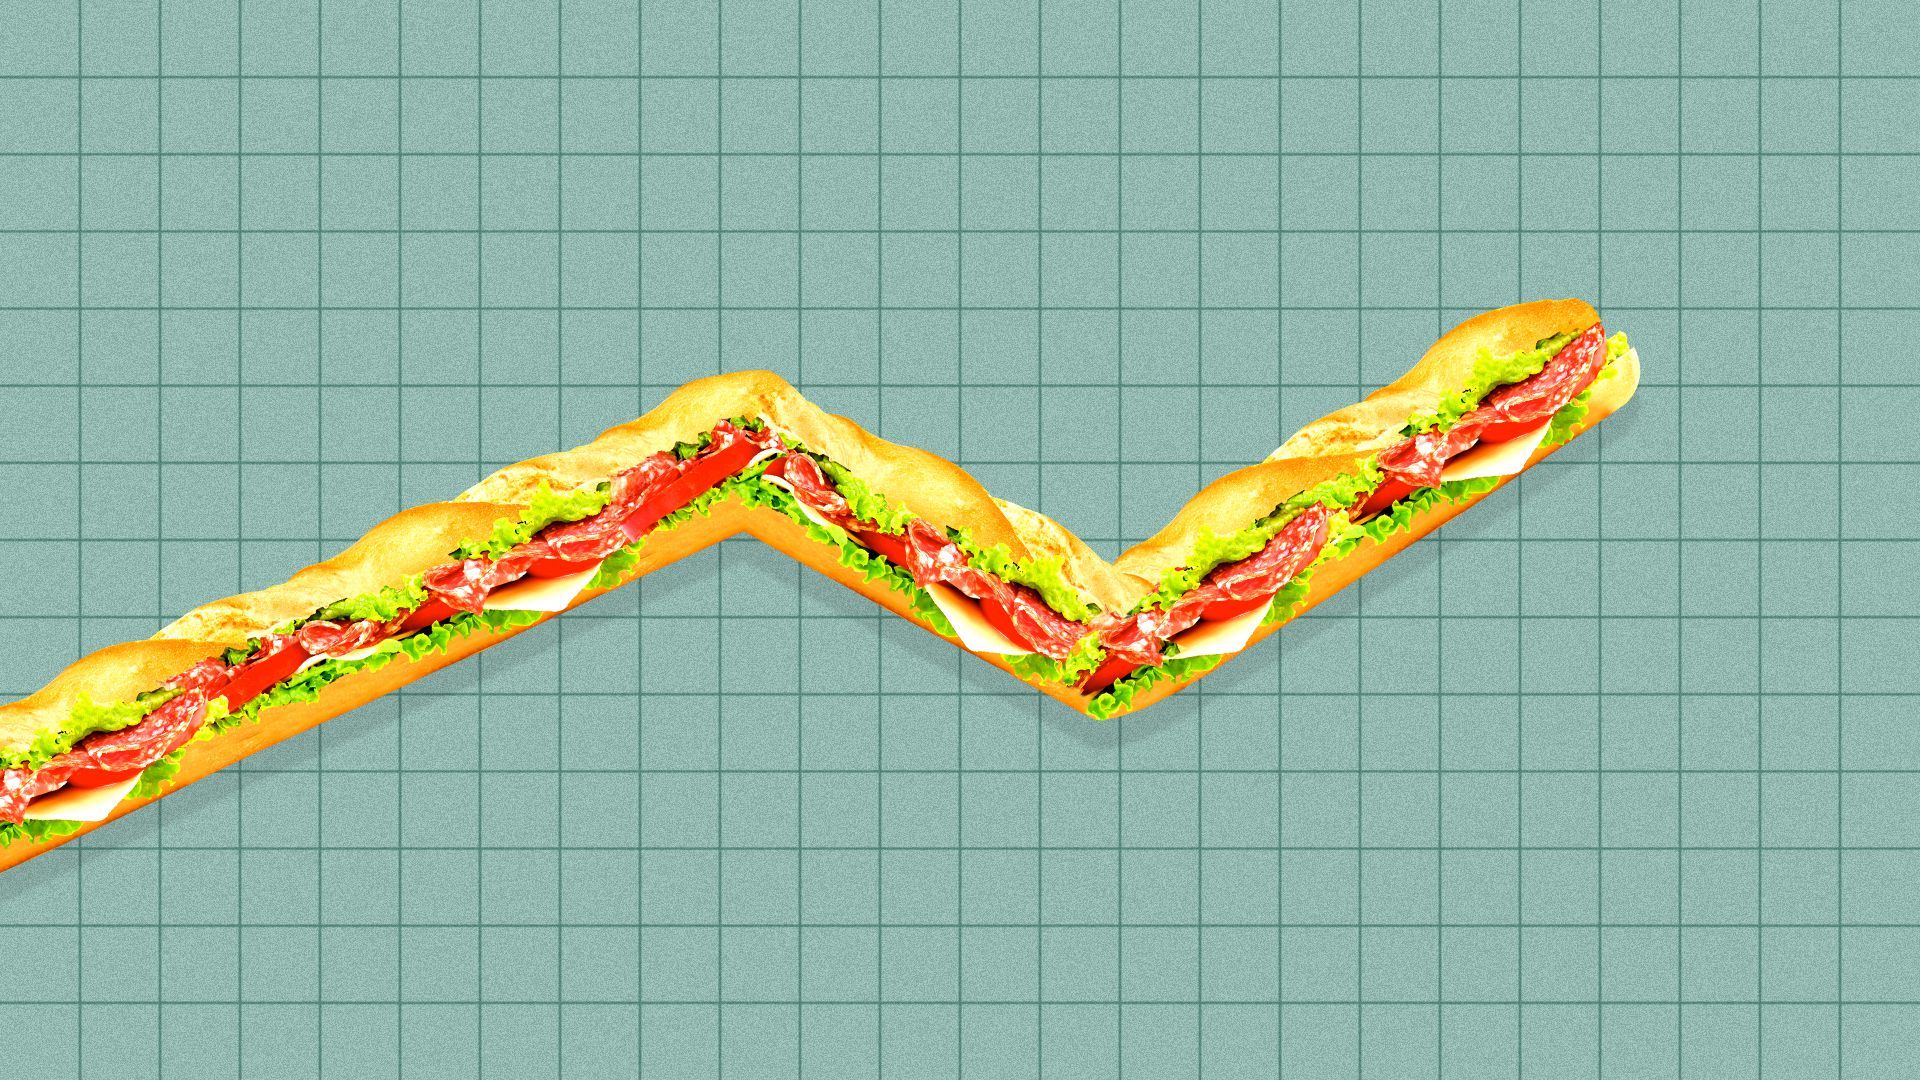 Illustration of a stock chart with the line made out of a hoagie.